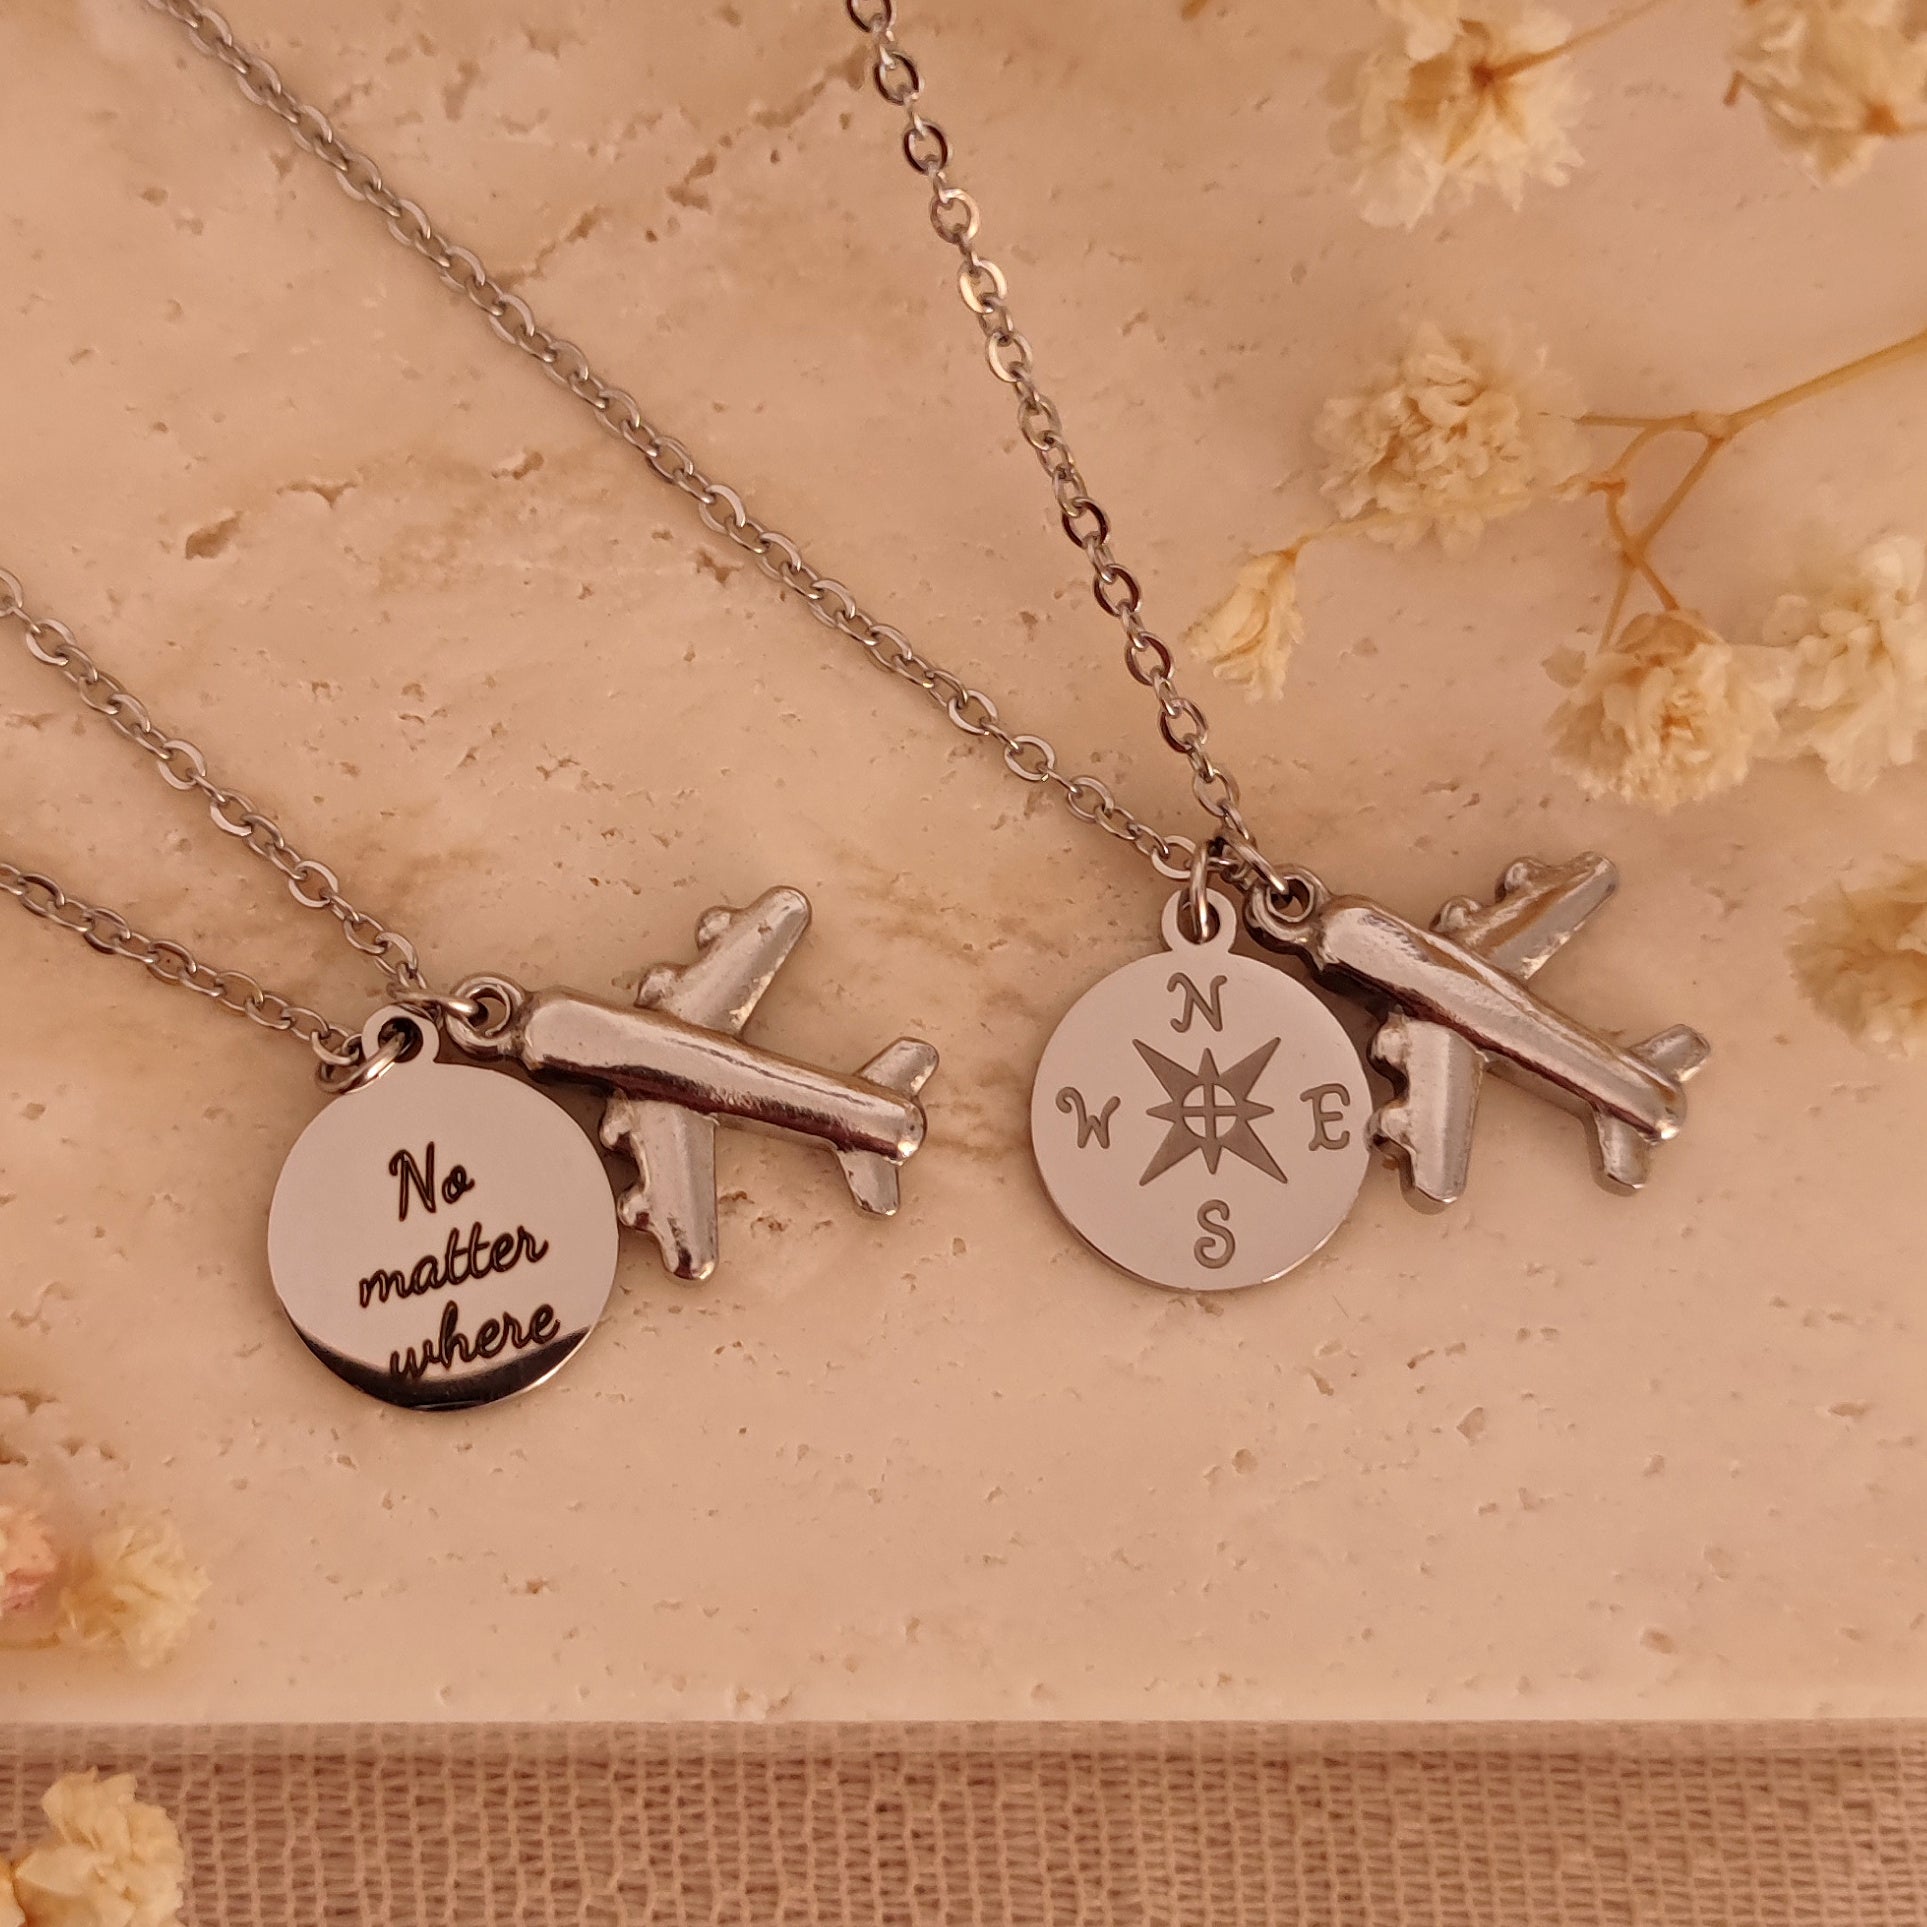 Best Friend No Matter Where Compass Necklace, Long Distance Gift, Best  Friends Gift, Gift for Her, Friendship Jewelry